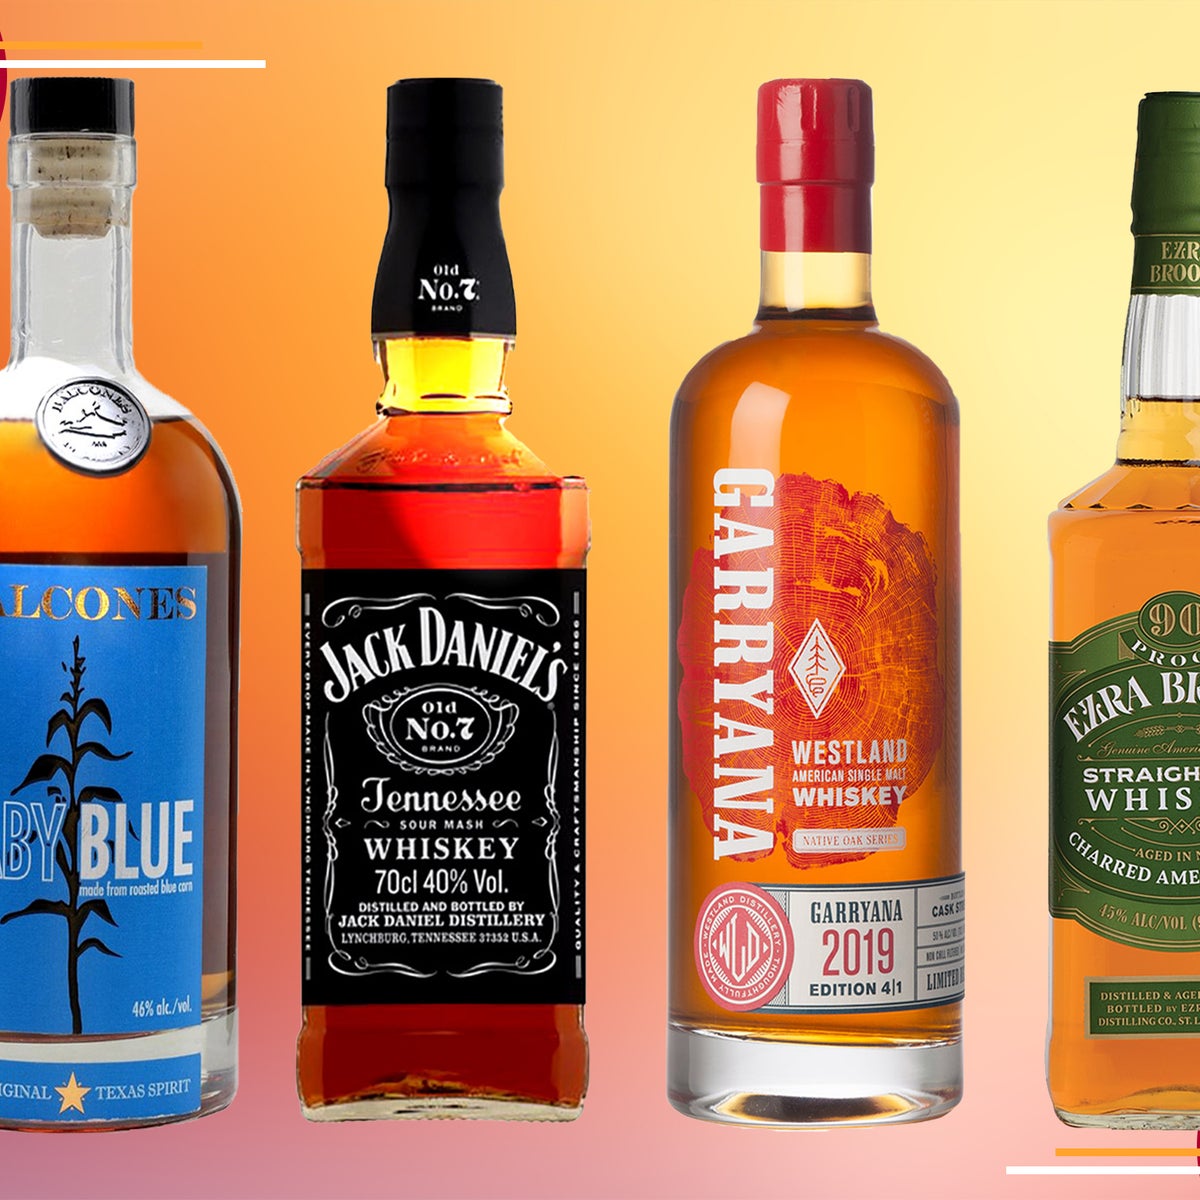 What Can You Mix With Whiskey? 9 Best Whiskey Mixers